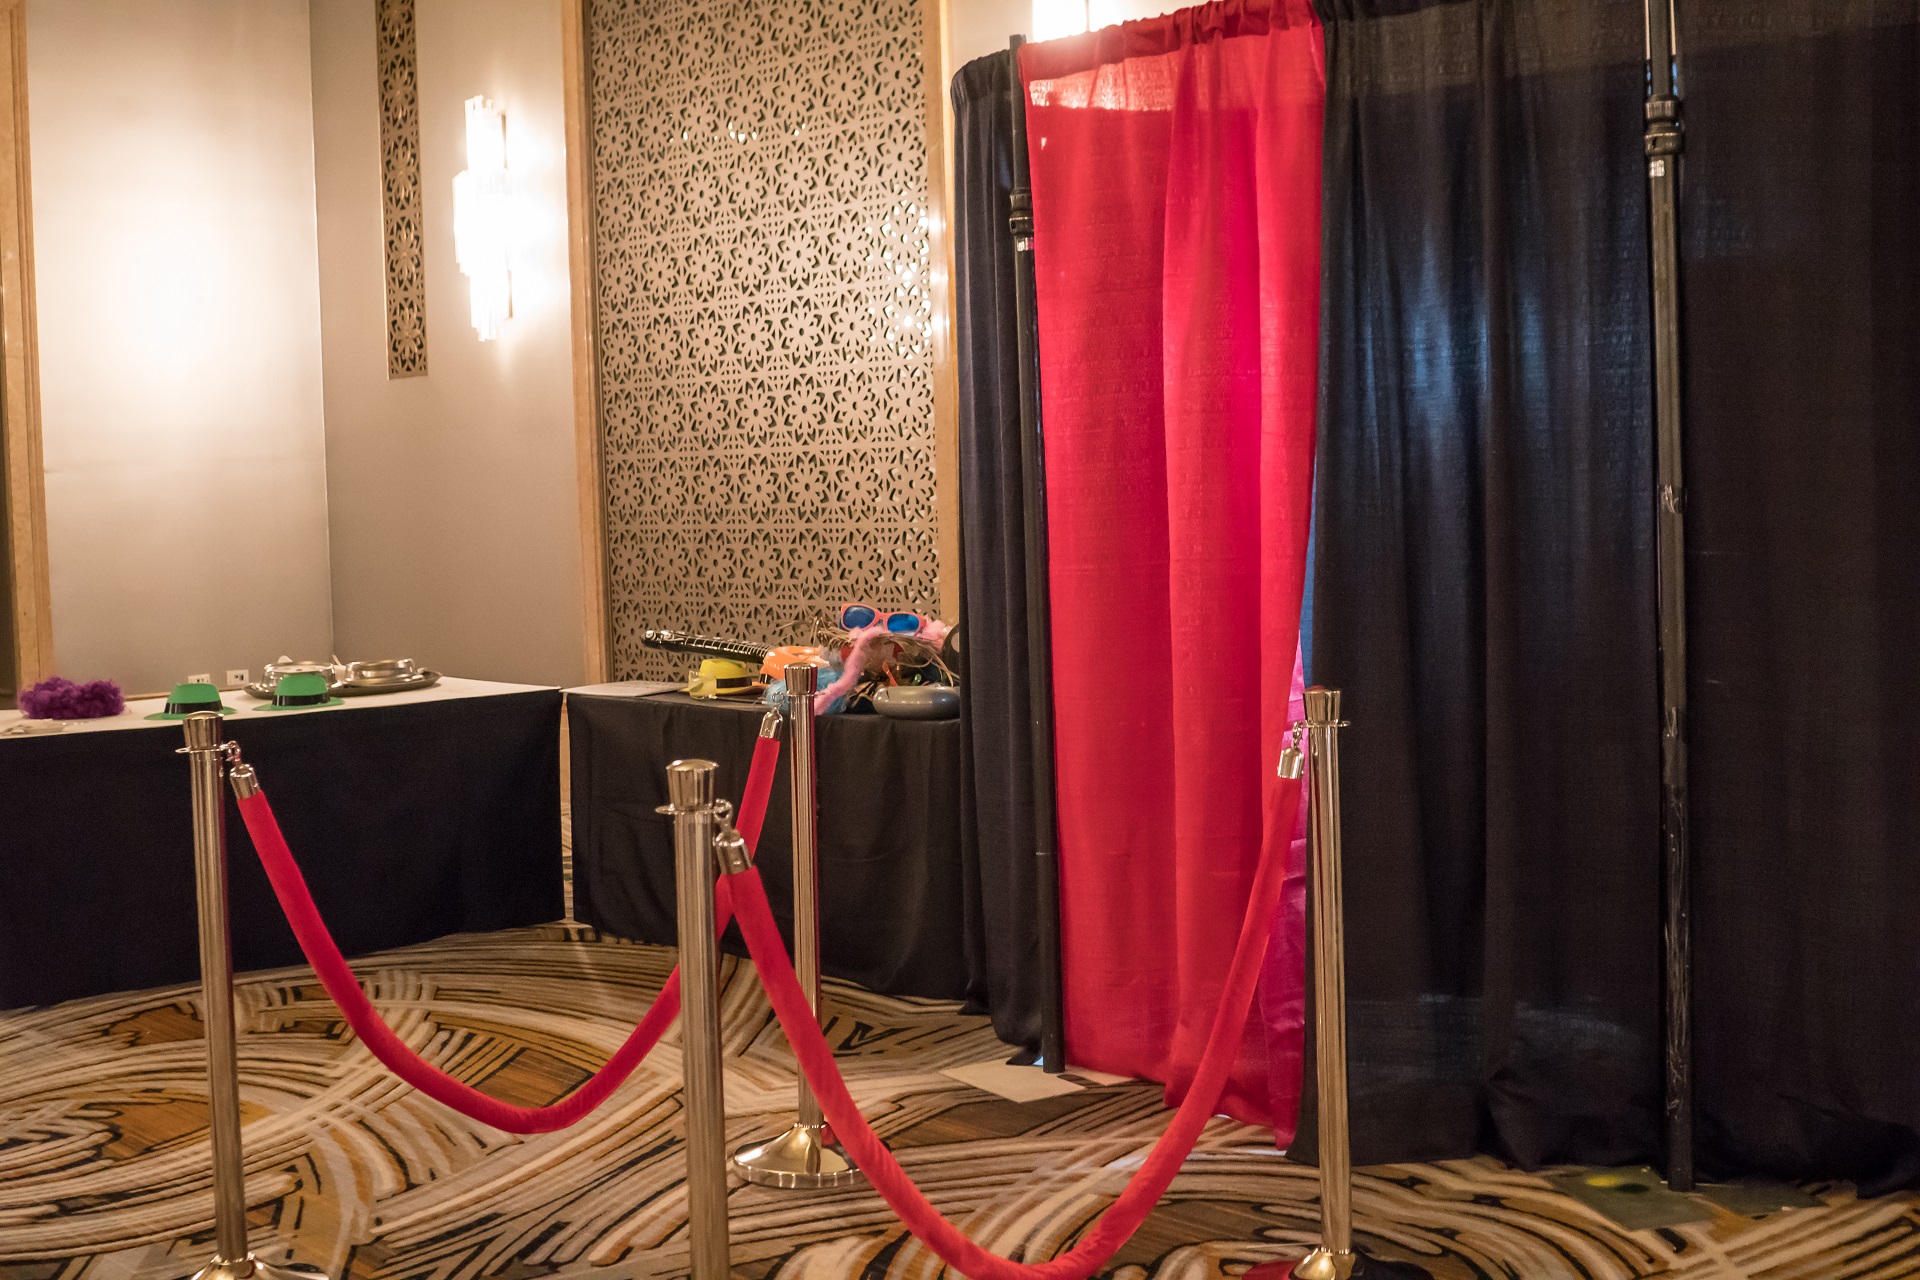 Photo booth at party event